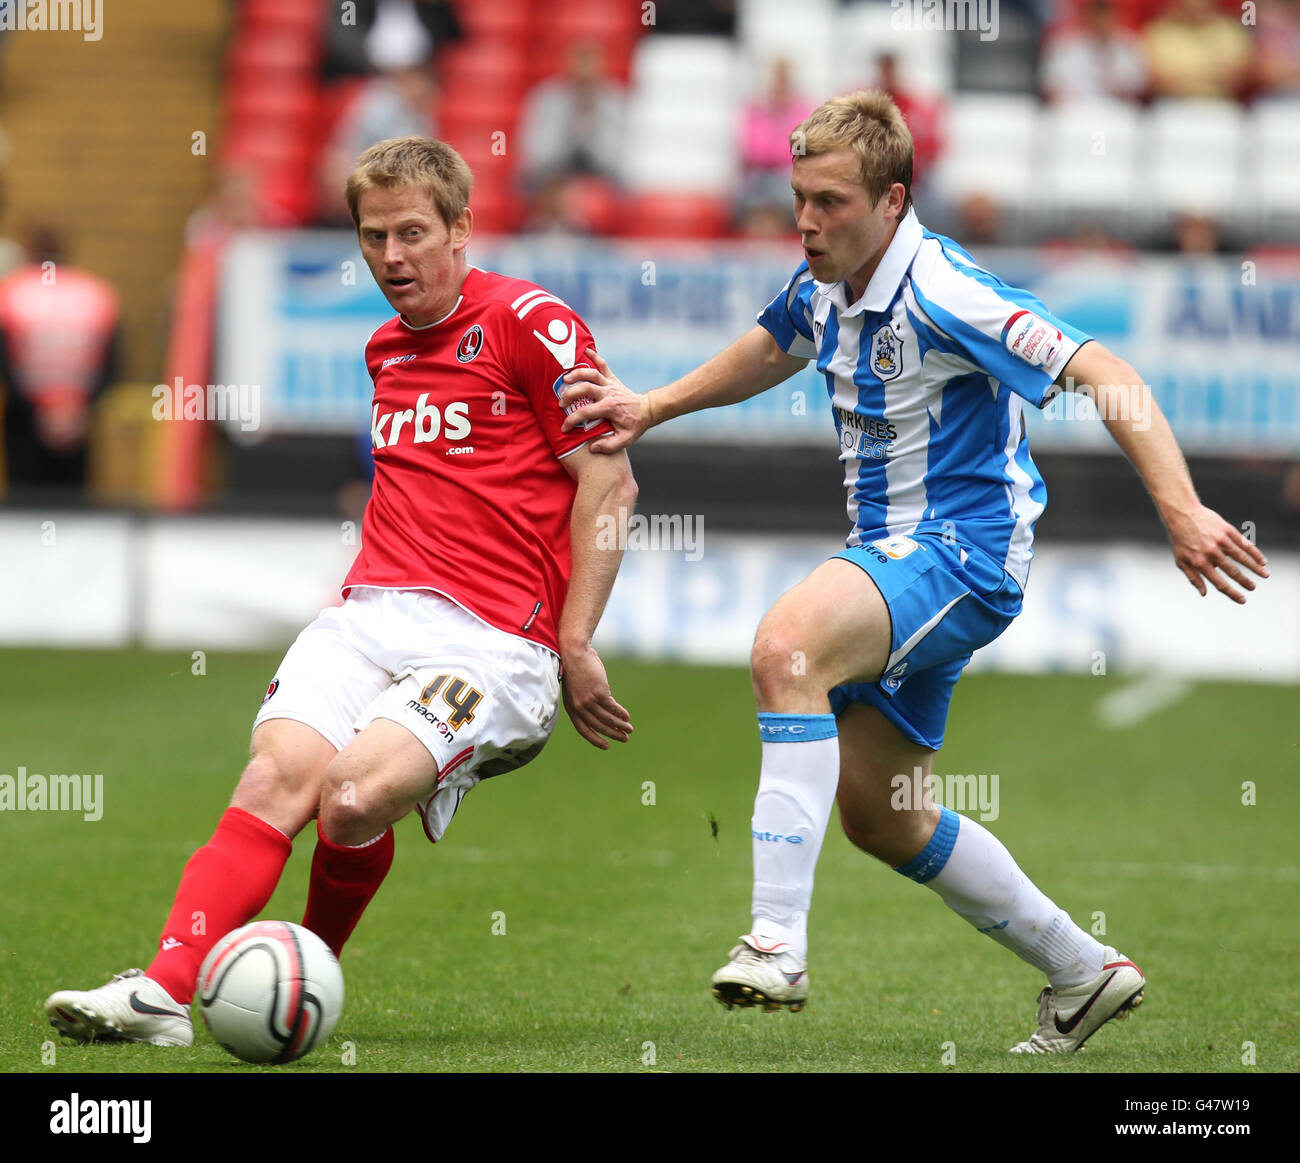 Charlton Athletic's Michael Stewart is challenged by Huddersfield Town's Scott Arfield during the npower Football League One match at The Valley, London. Stock Photo